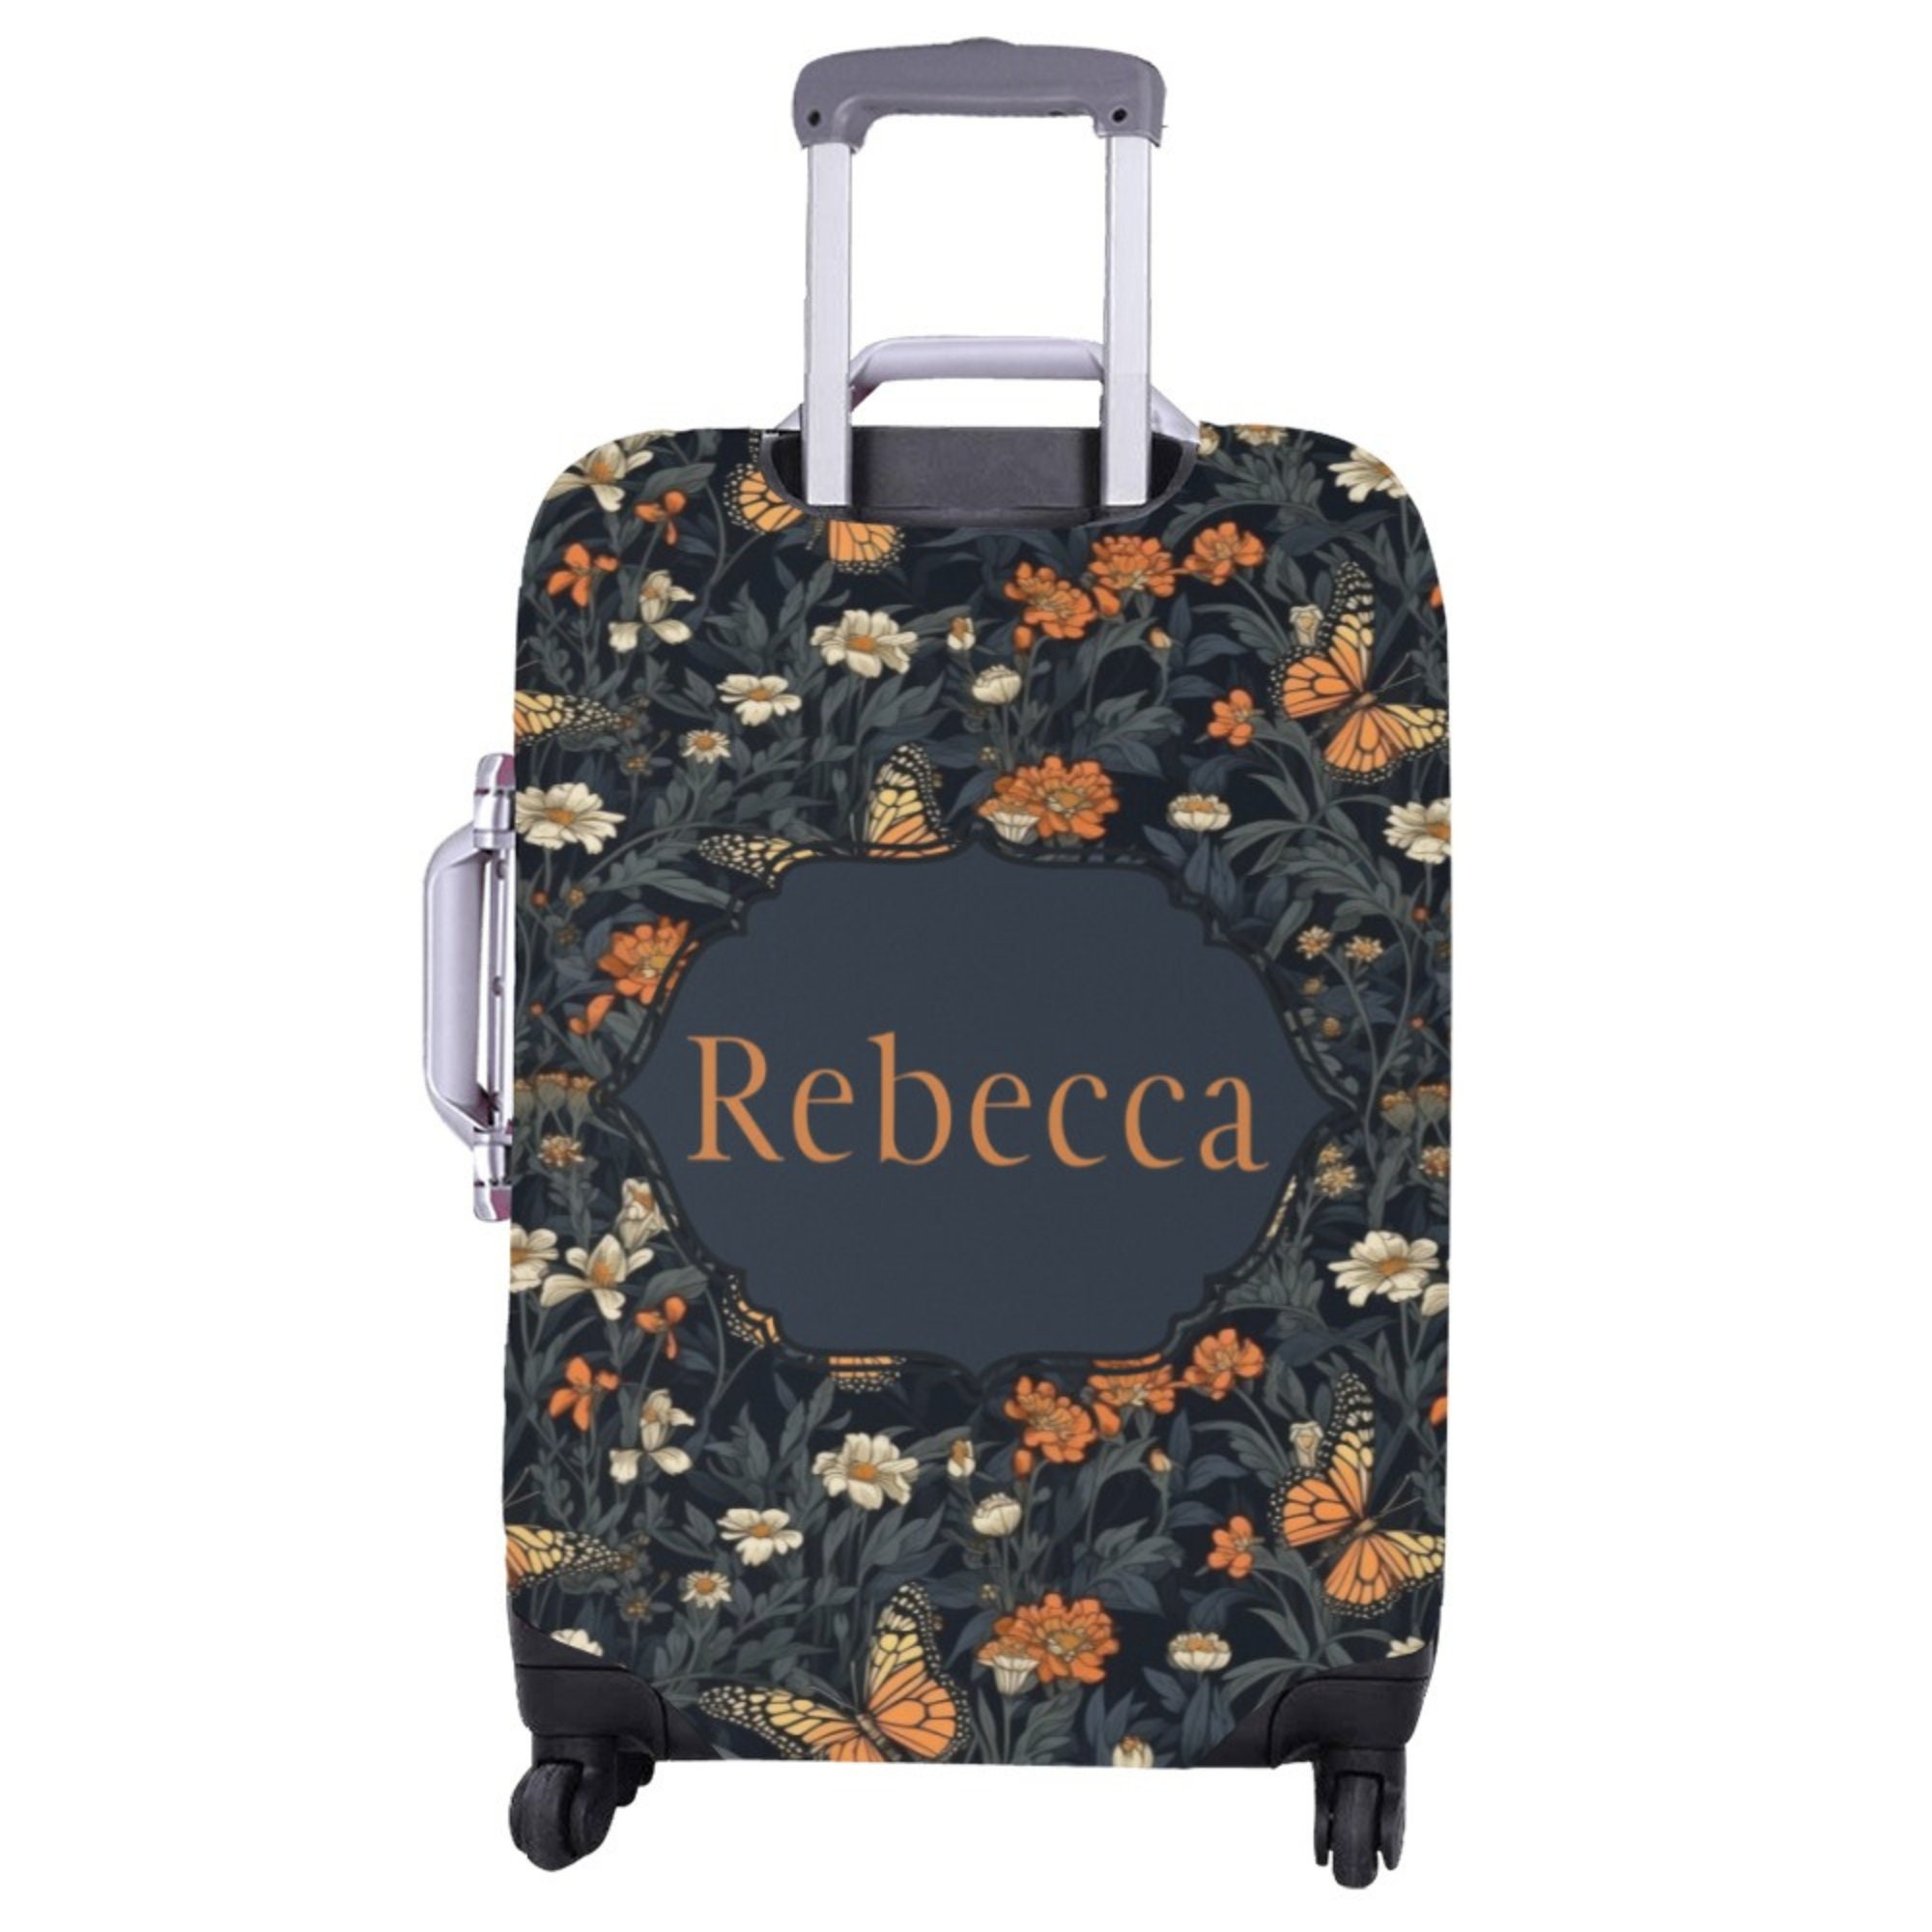 Luggage Cover Suitcase Protector-Personalized Luggage Cover-Cottagecore Suitcase Covers